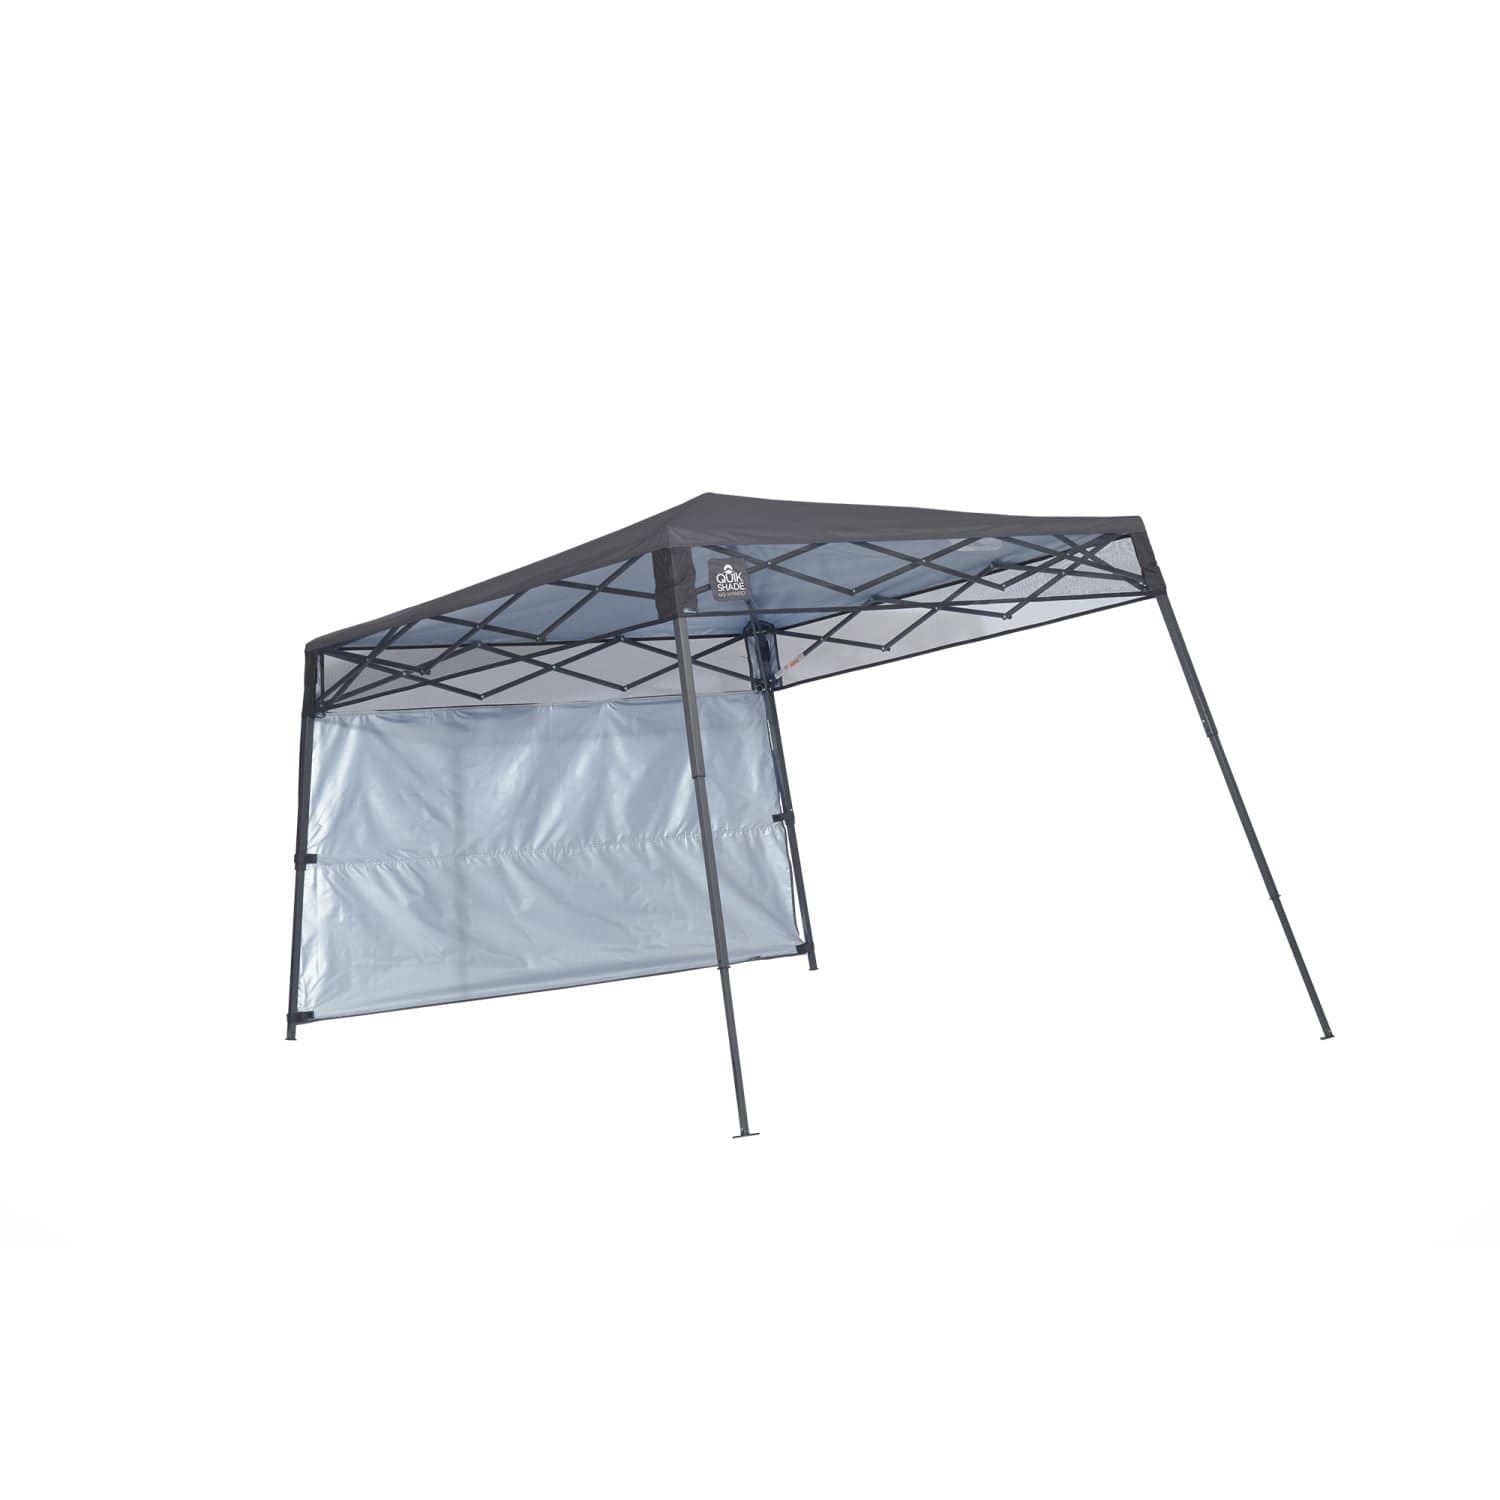 Quik Shade Pop Up Canopies Quik Shade | Go Hybrid 6' x 6' Slant Leg Canopy - Charcoal 167520DS